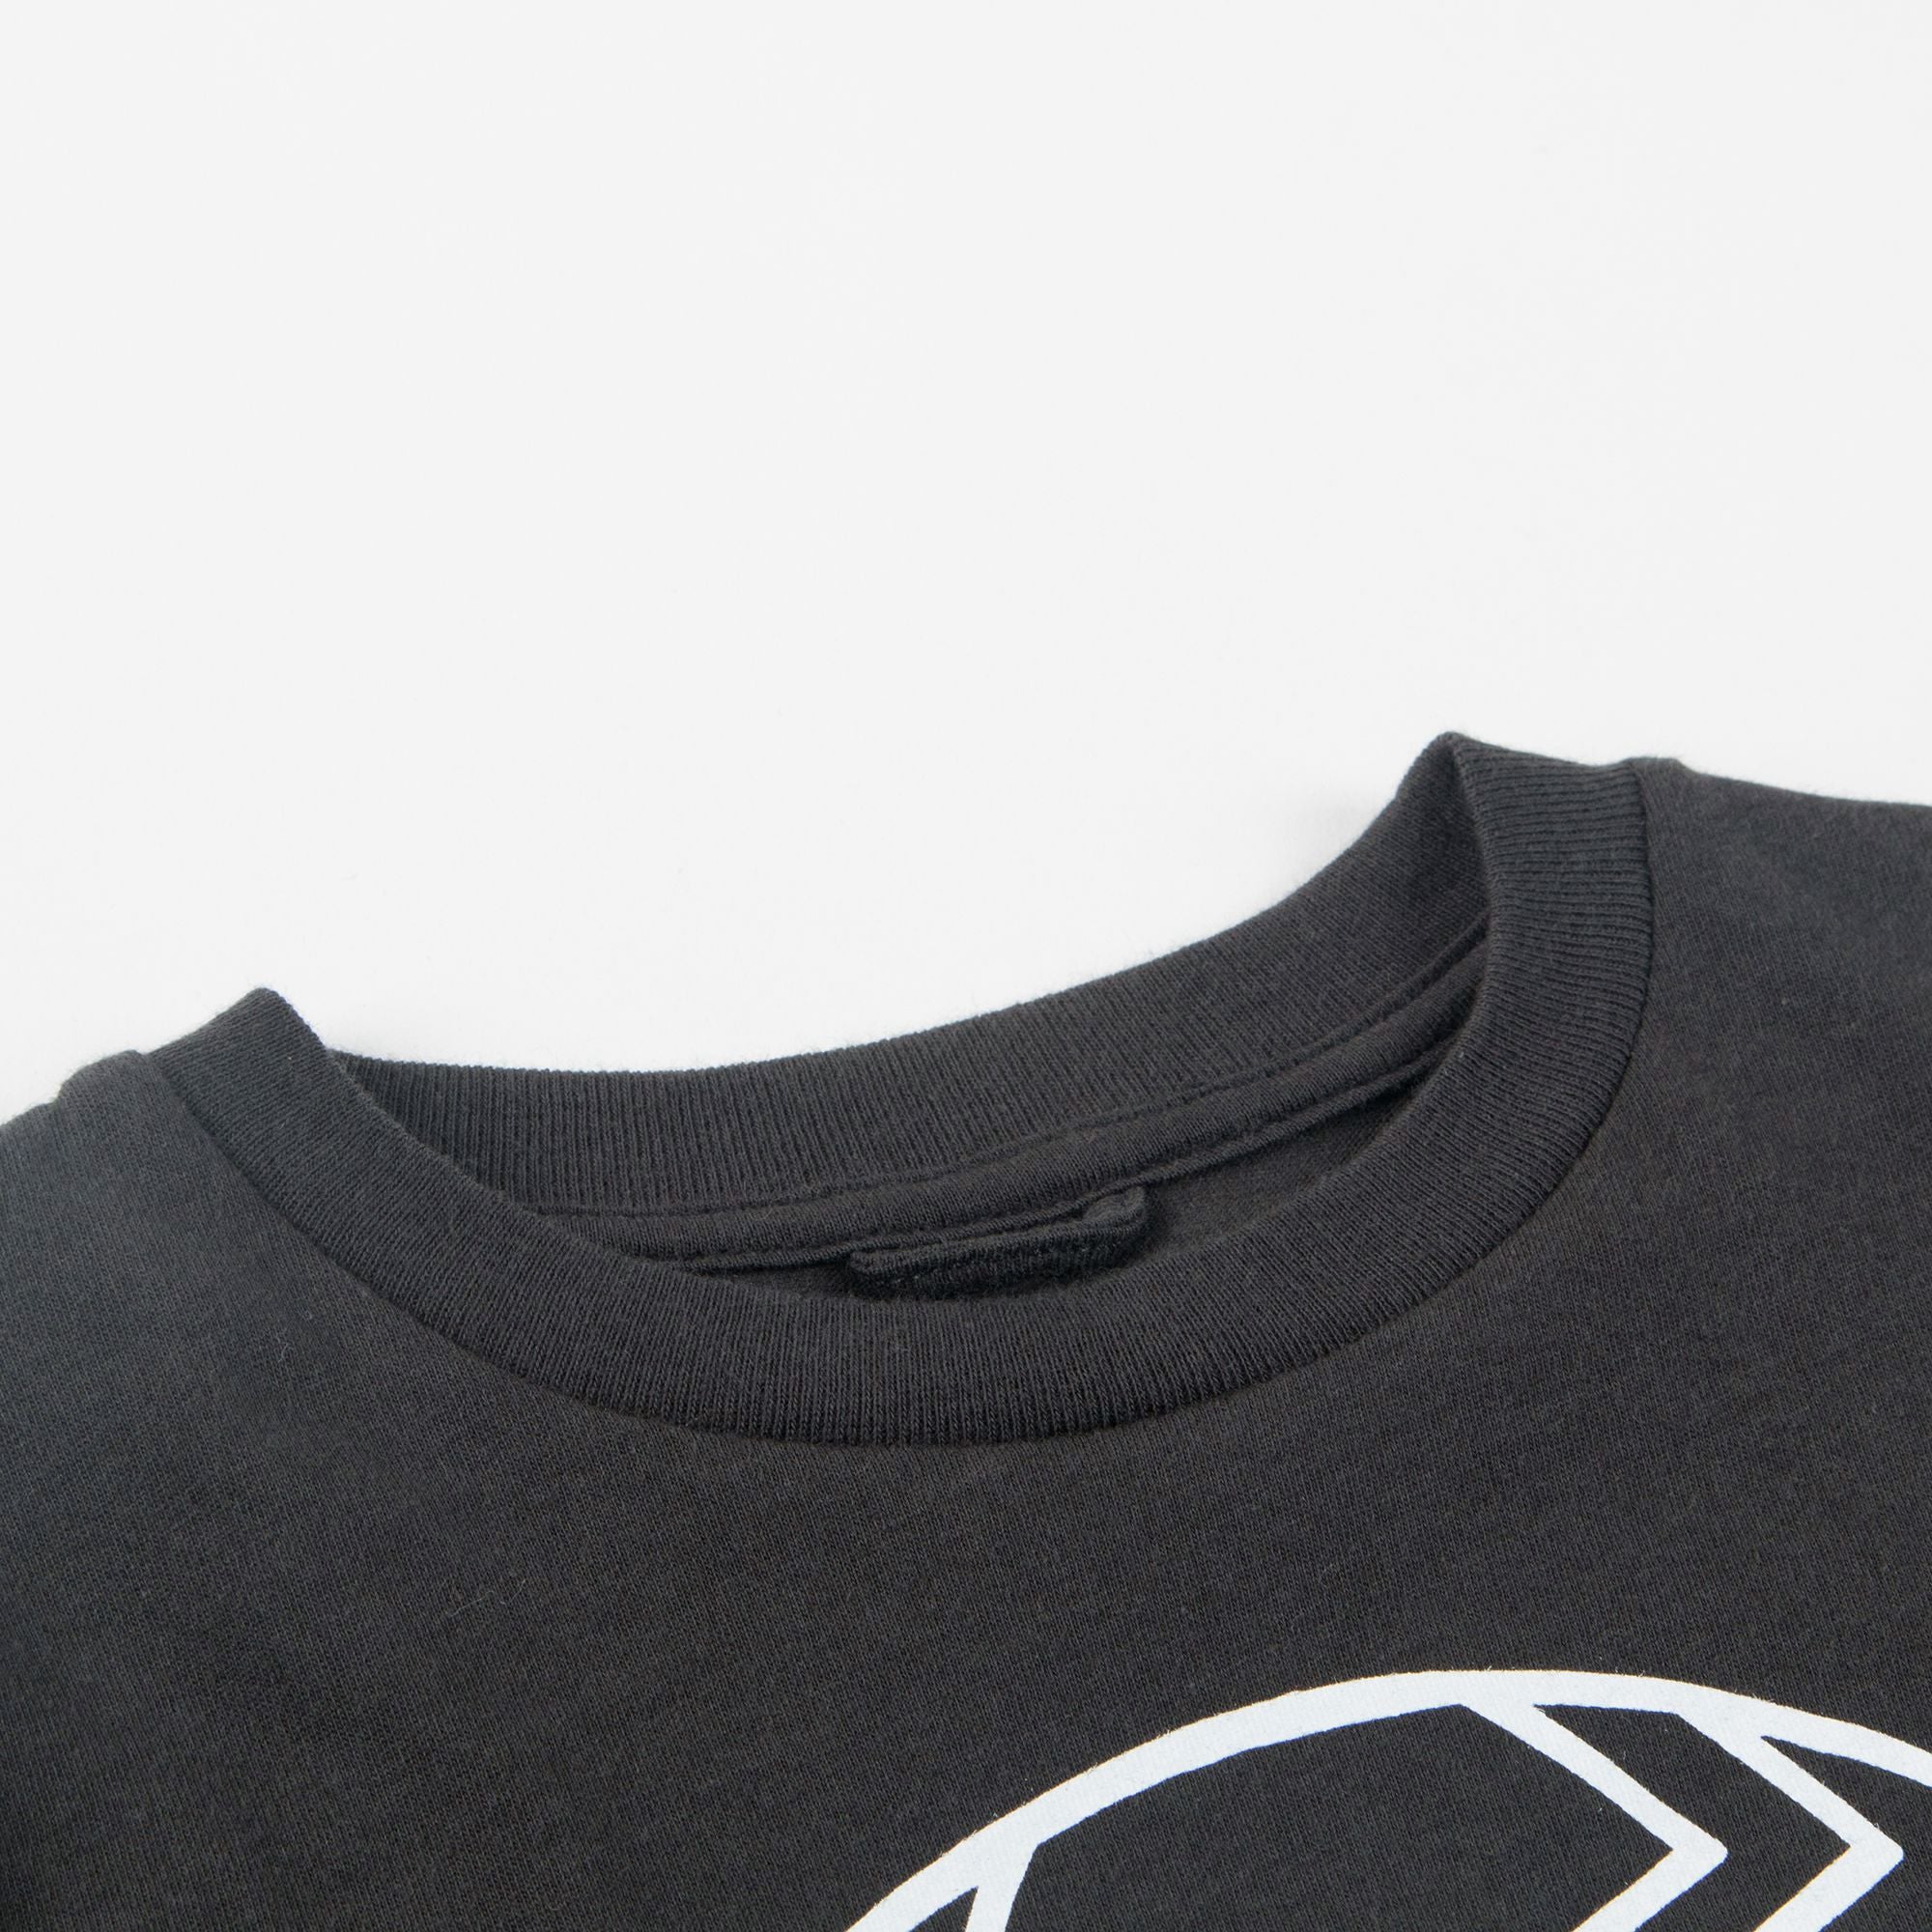 Boys Black with Patches Cotton T-shirt